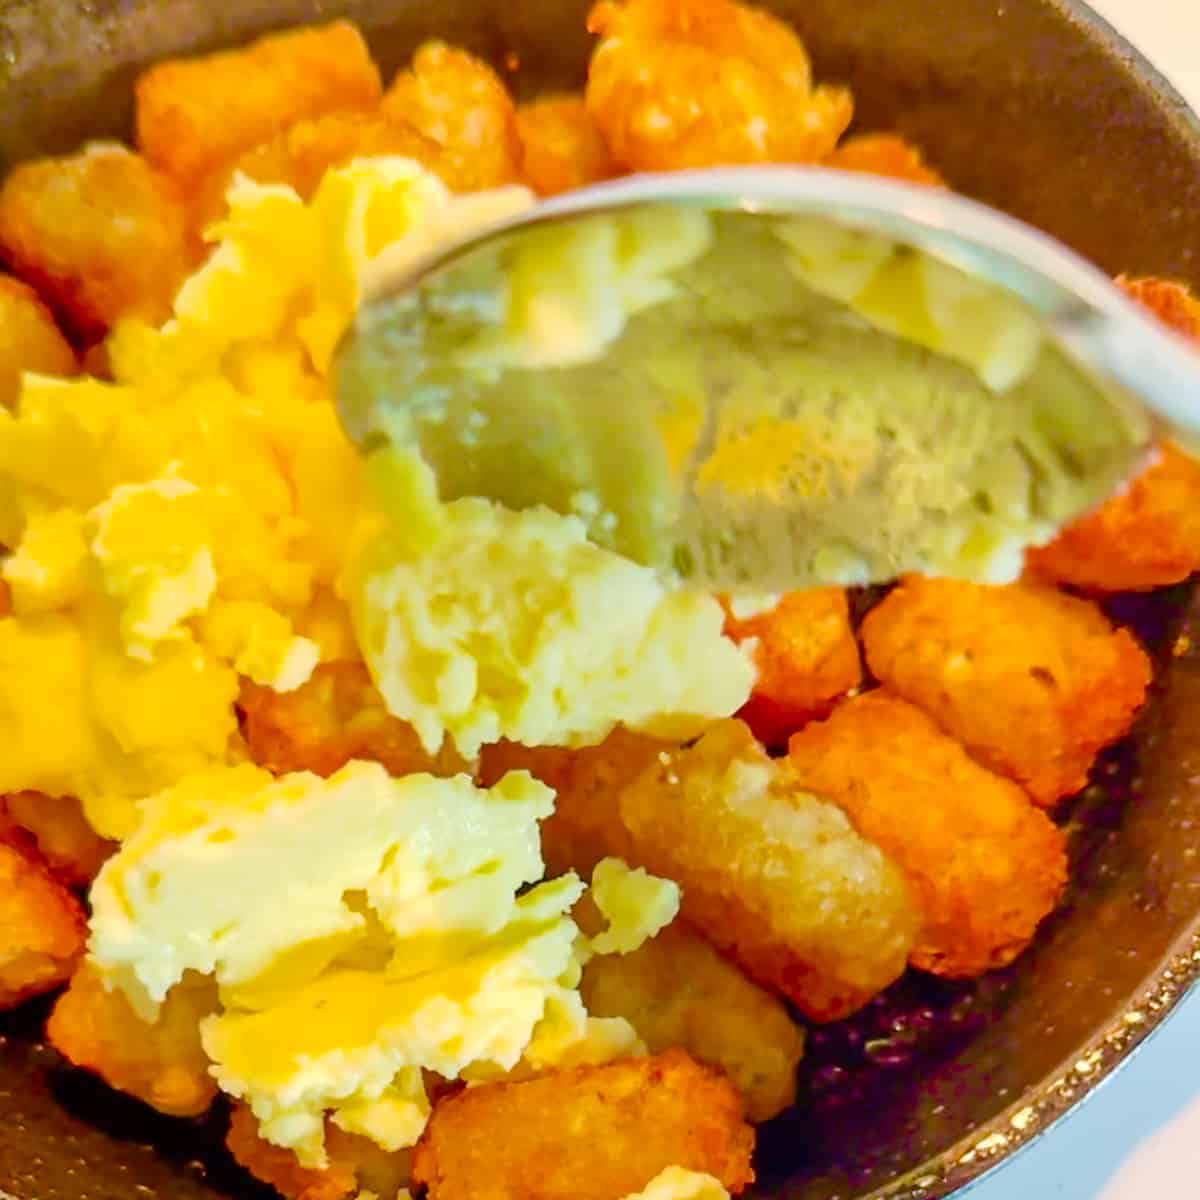 scooping scrambled eggs on top of tater tots.